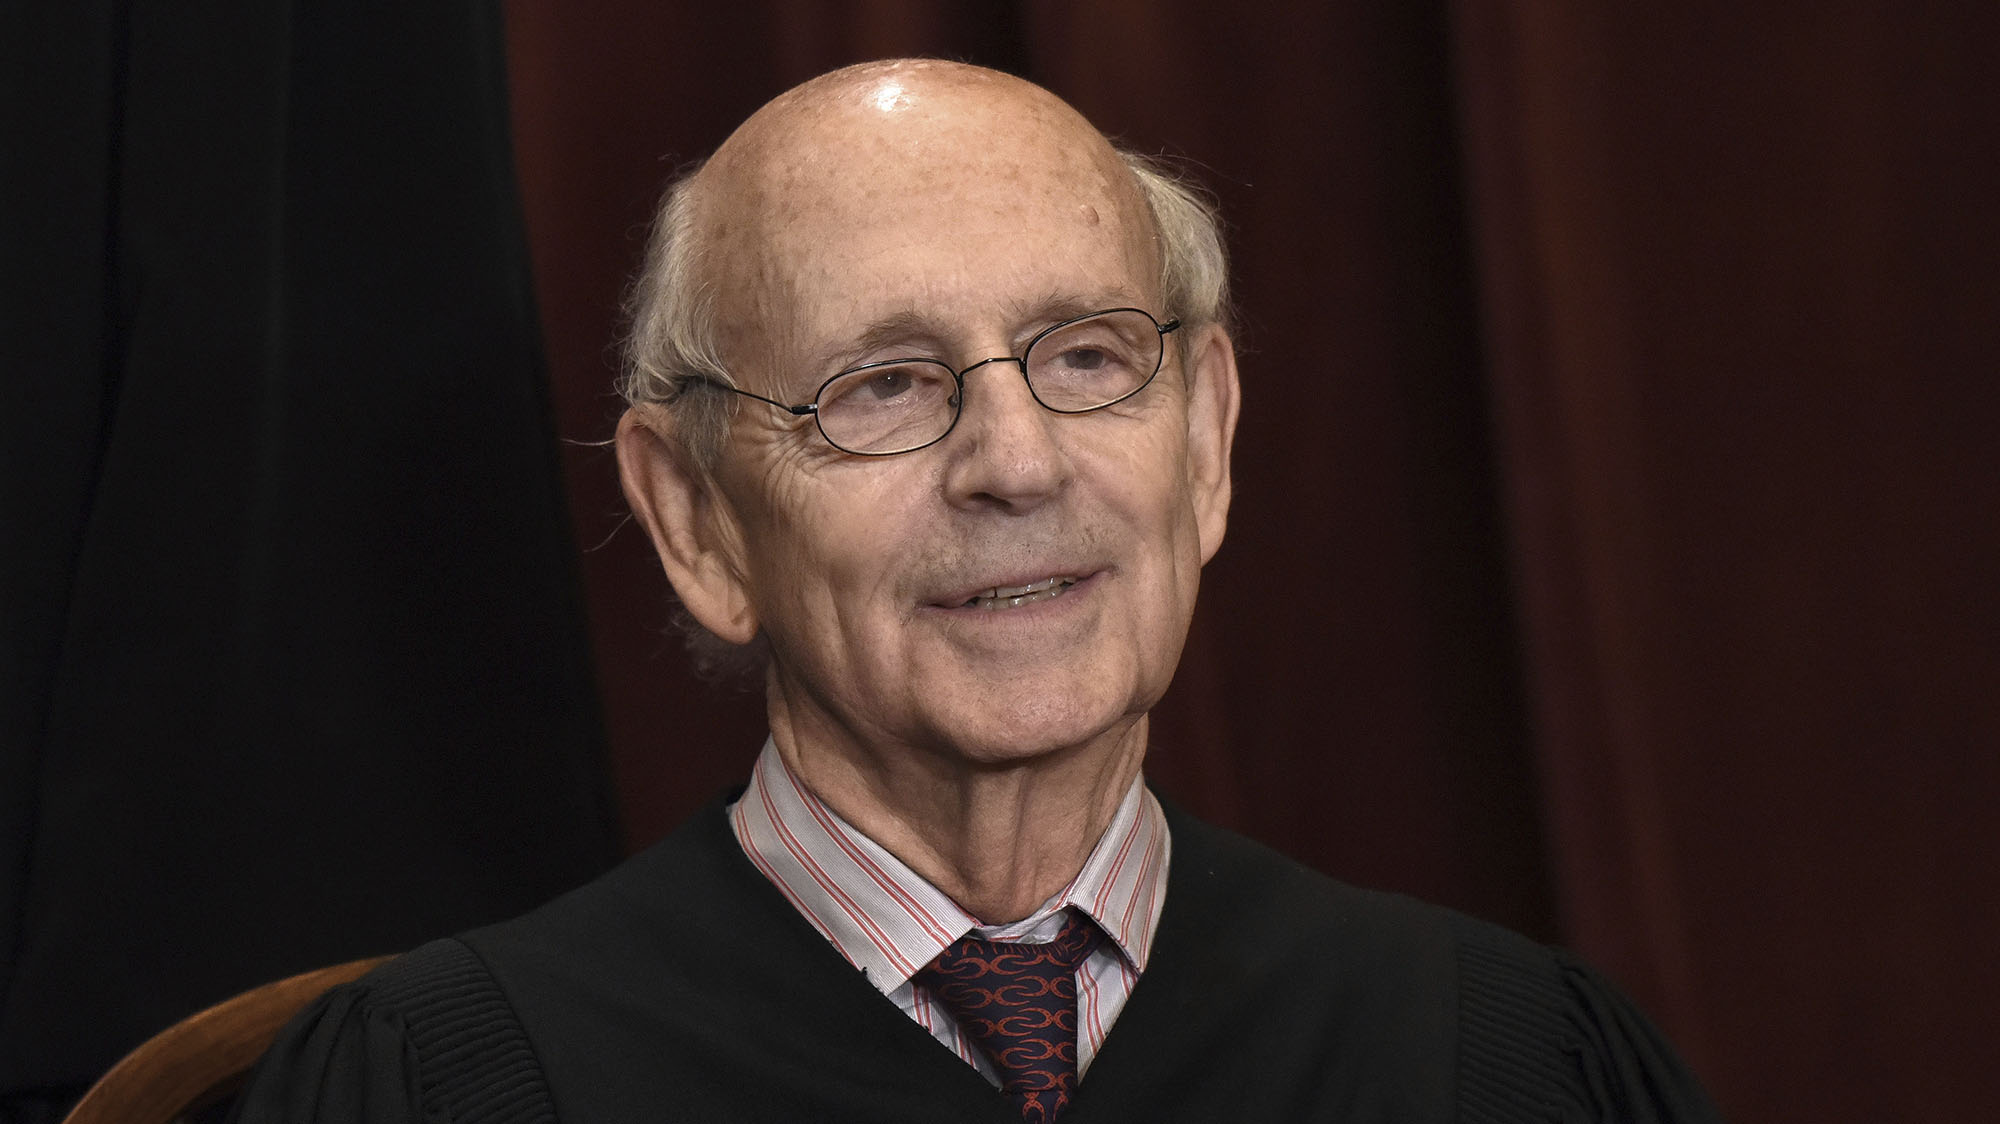 Supreme Court Justice Breyer Just Issued an Ominous Warning About